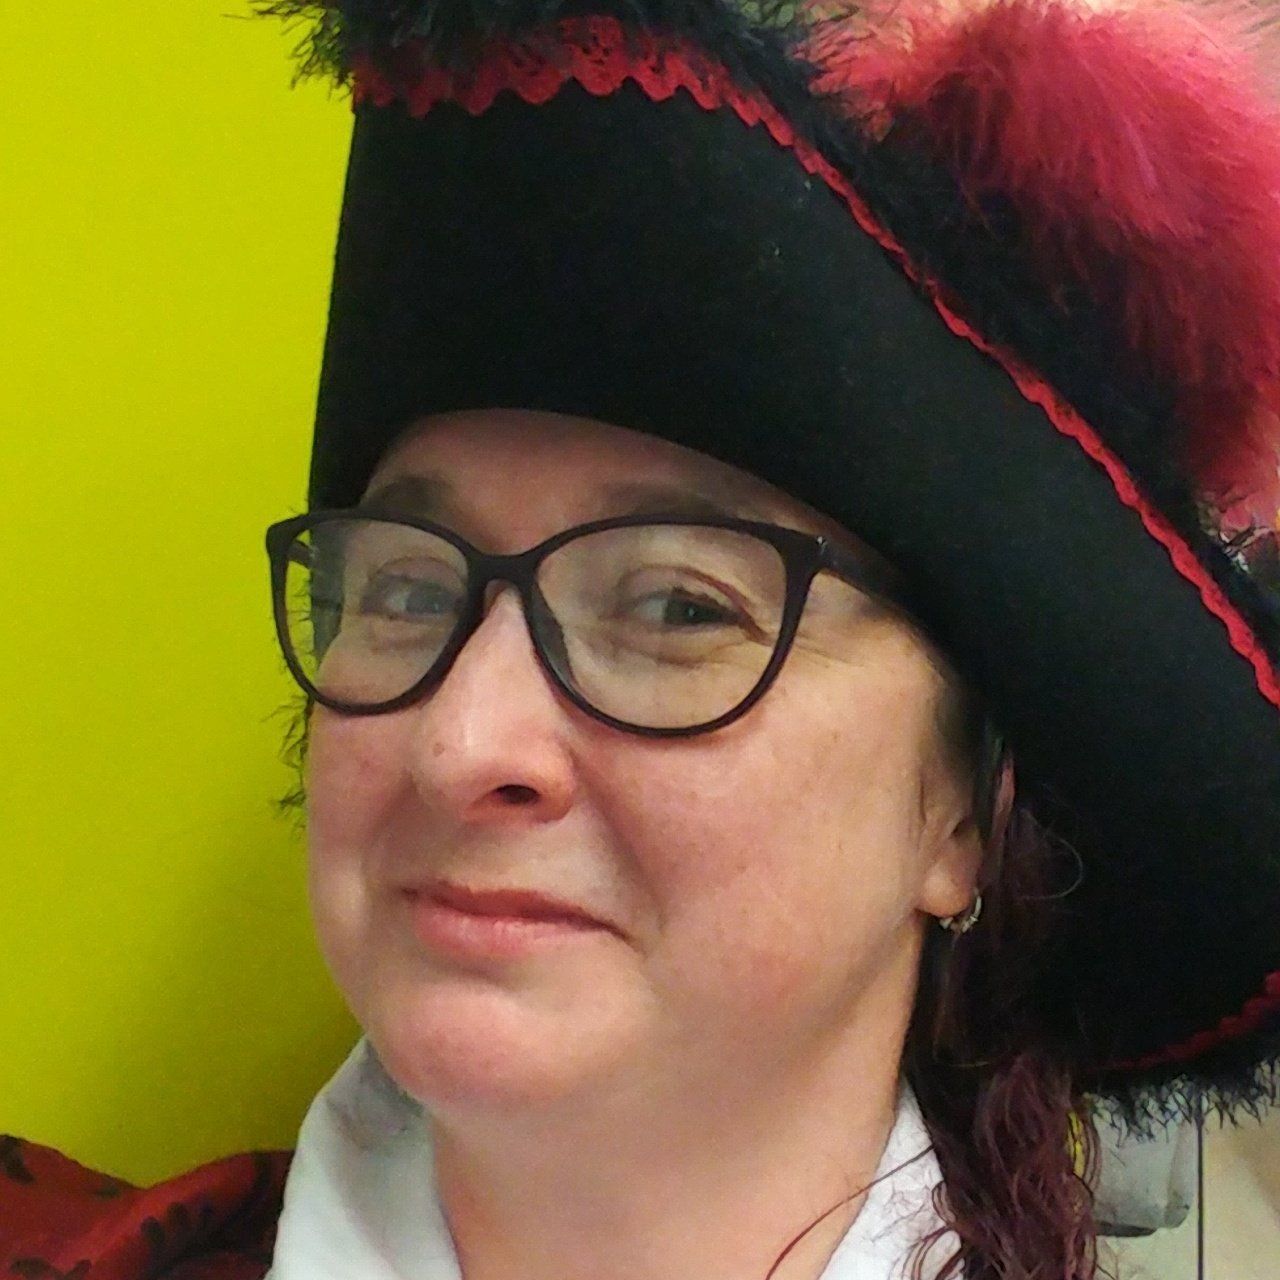 Jasmine Fox, cosplaying as a pirate, wearing black and red